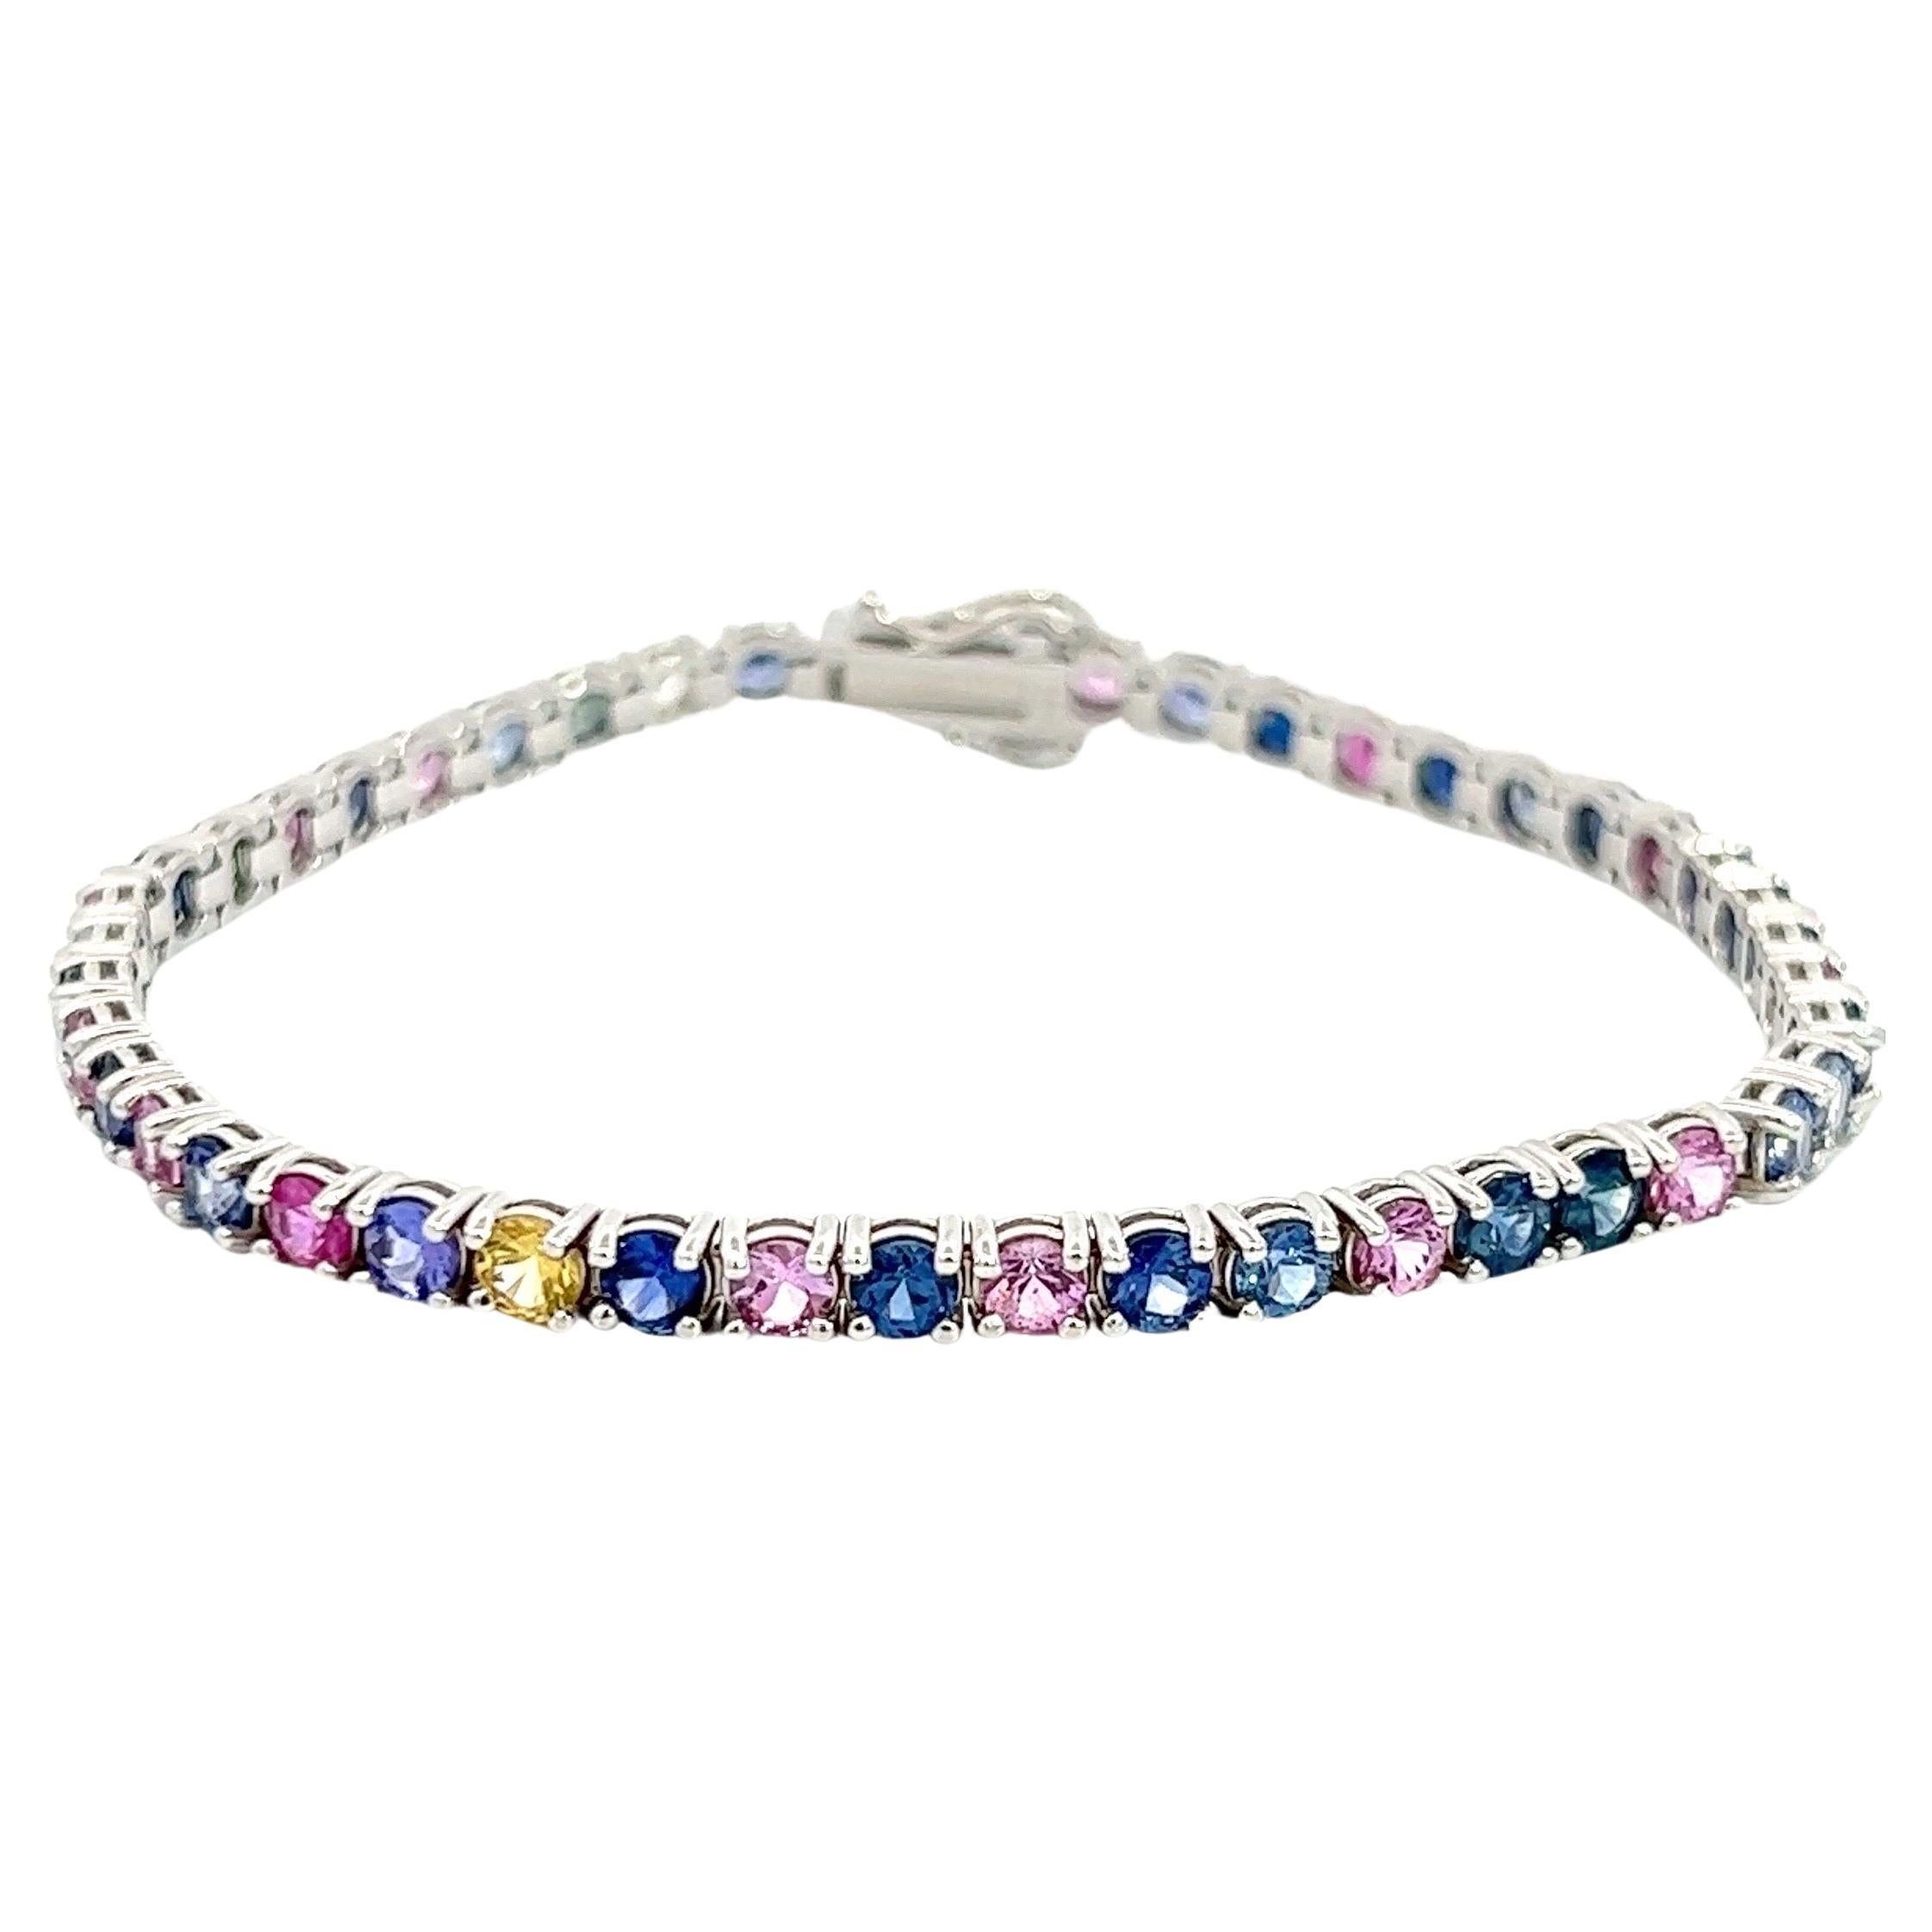 Natural Multi-color Rainbow Sapphires Tennis Bracelet
The Brilliant Color Sapphires will give you a boost of joy in any moment of your life.
14k White Gold
Number of Sapphires: 46
Total Sapphires Weight: 7.53 Carats
Bracelet's Length: 7' inches 